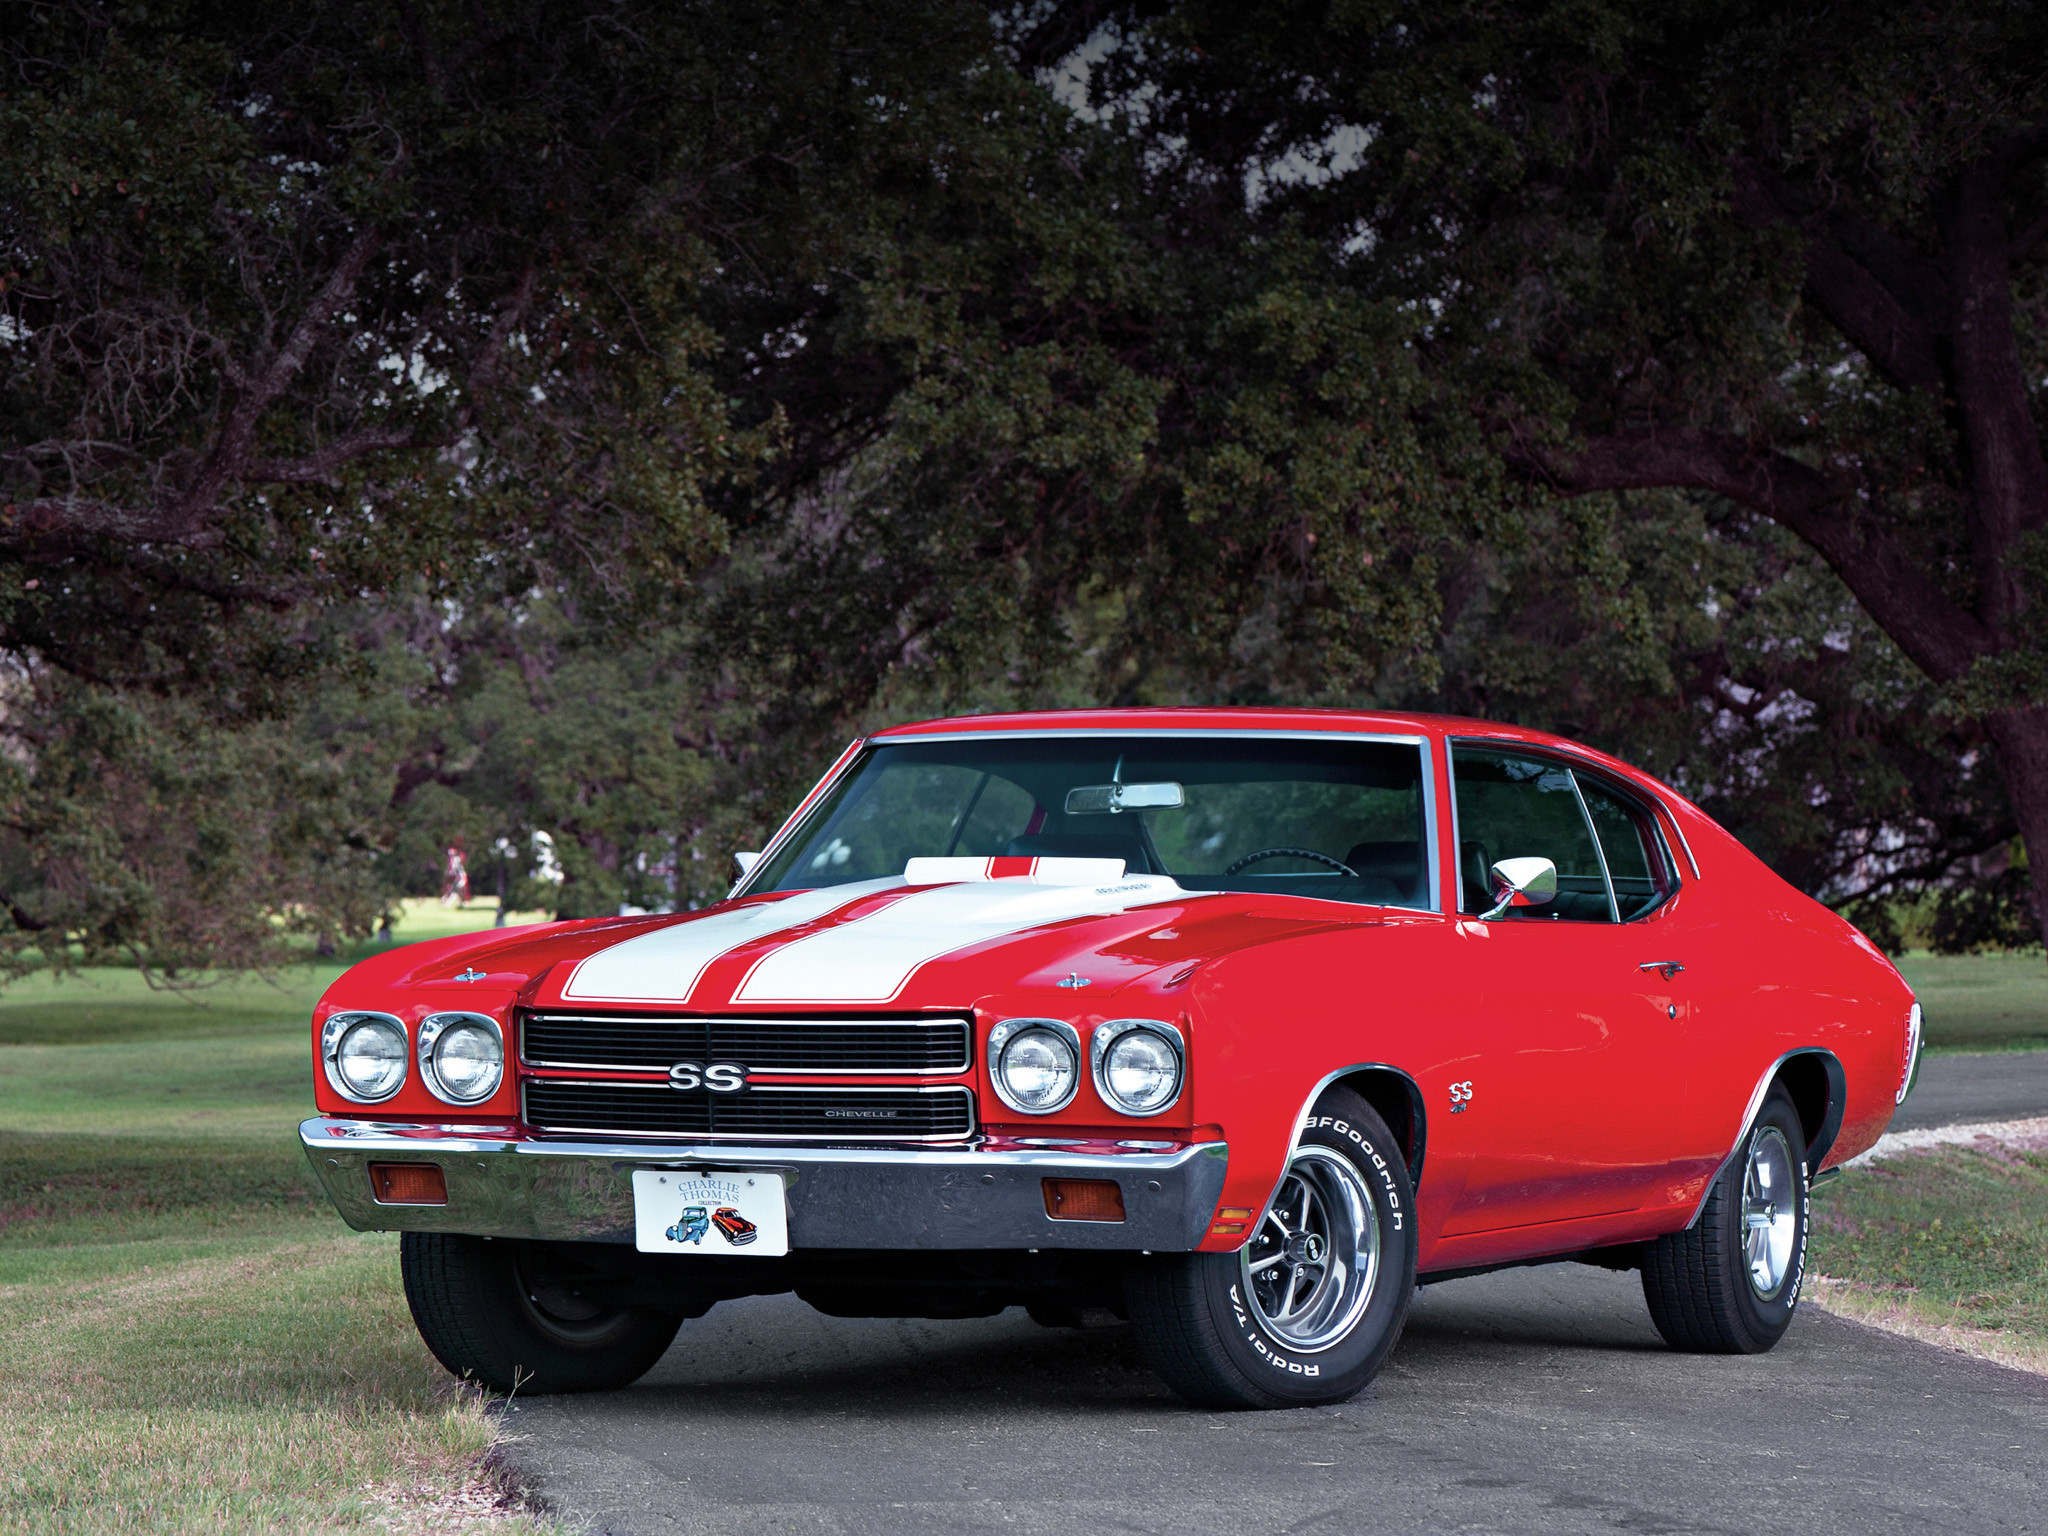 1970 Chevrolet Chevelle SS 454 LS6 Hardtop Coupe muscle classic s s r wallpaper 149070 WallpaperUP